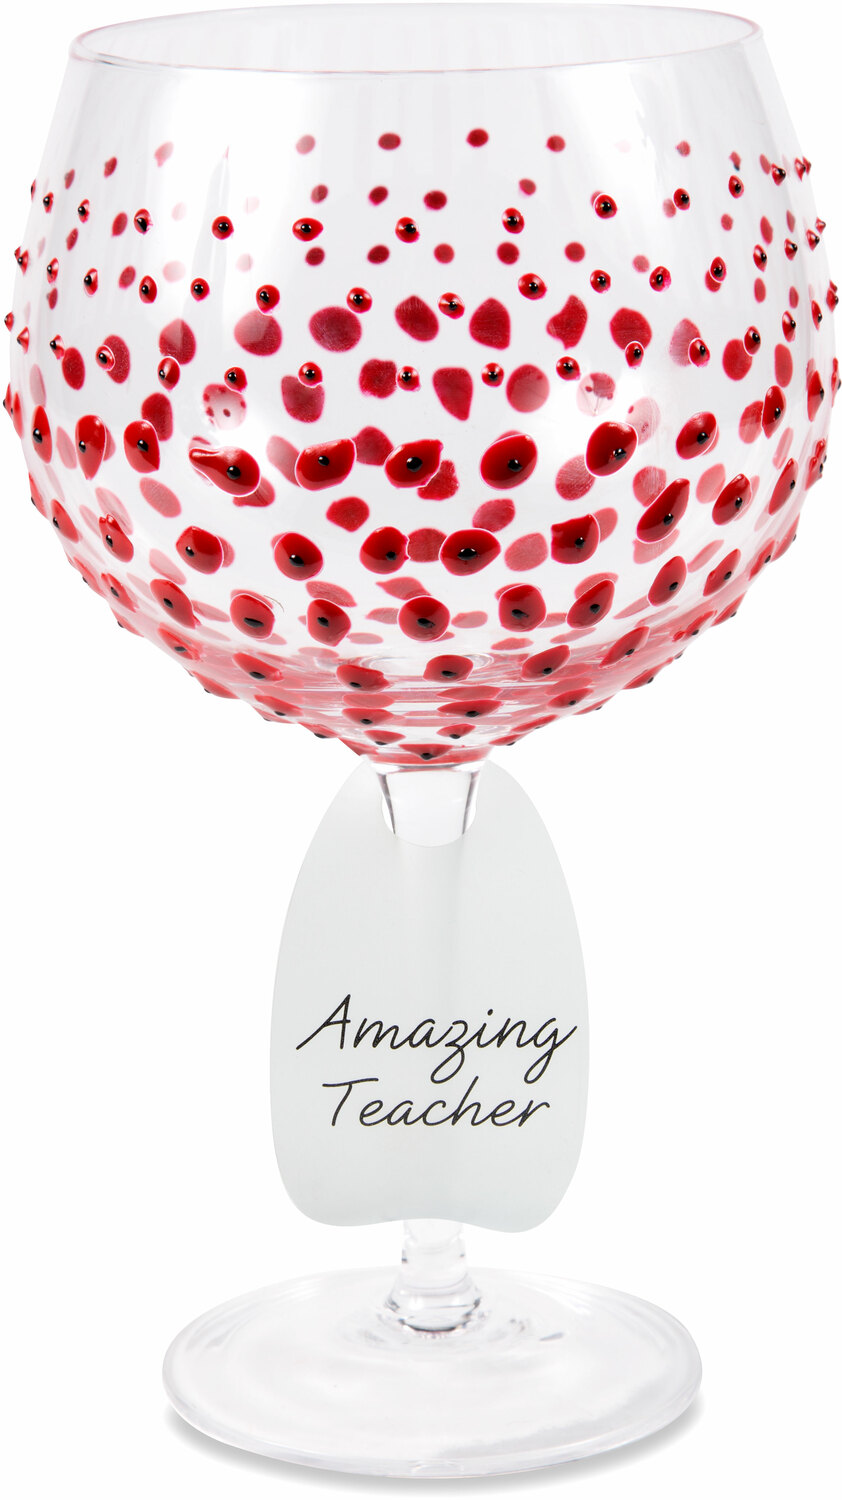 Red Poppies by Sunny by Sue - Red Poppies - 24 oz Hand Decorated Glass